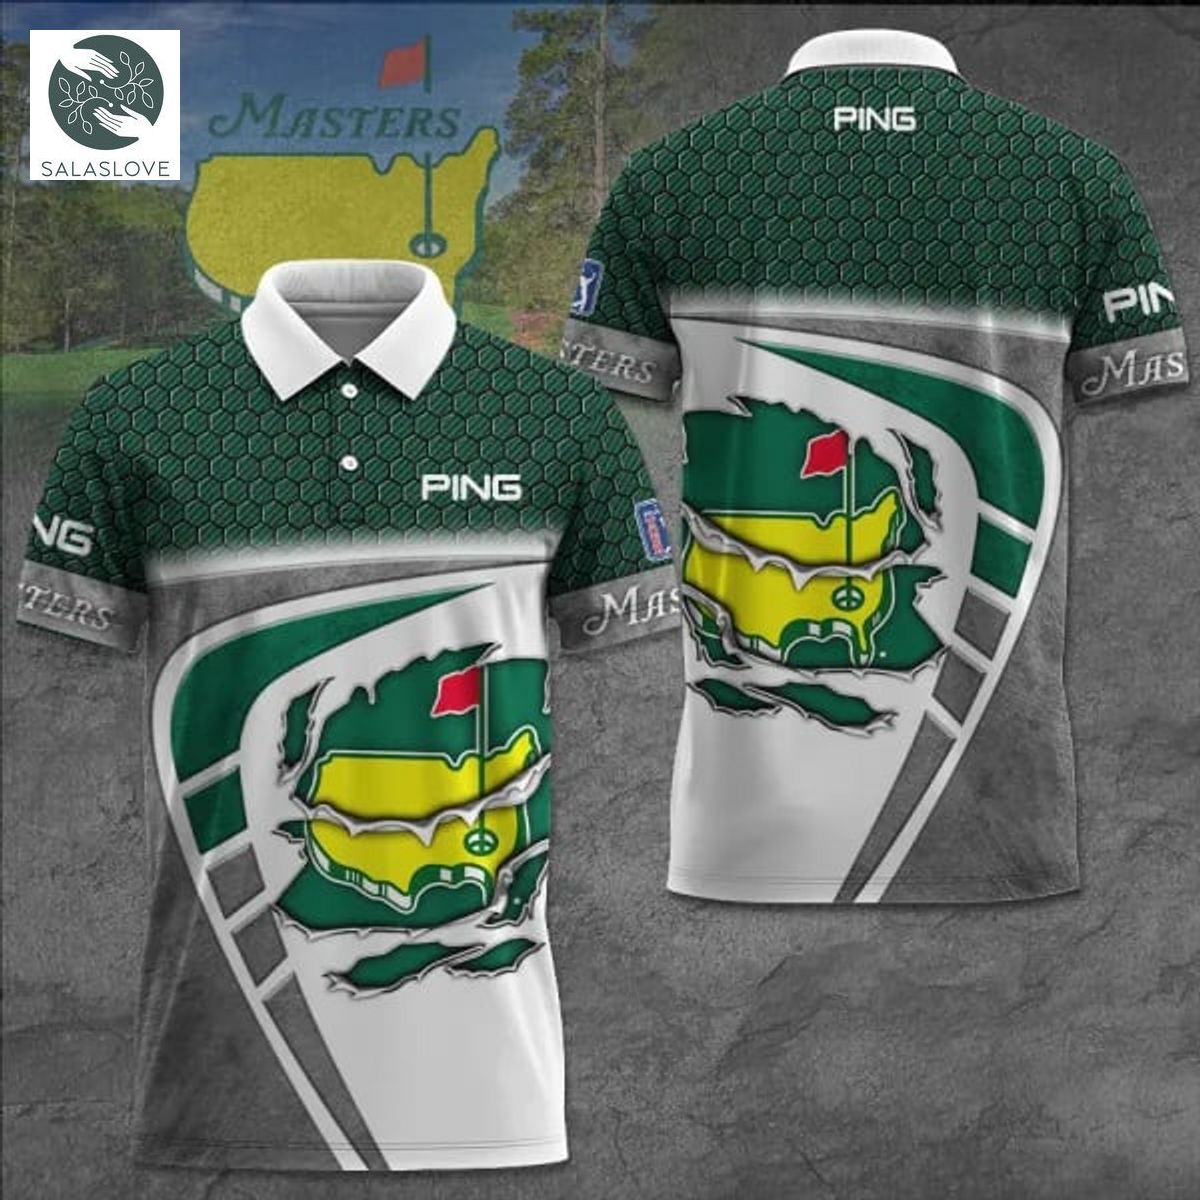 PING x Masters Tournament 3D Polo Shirt TY30619